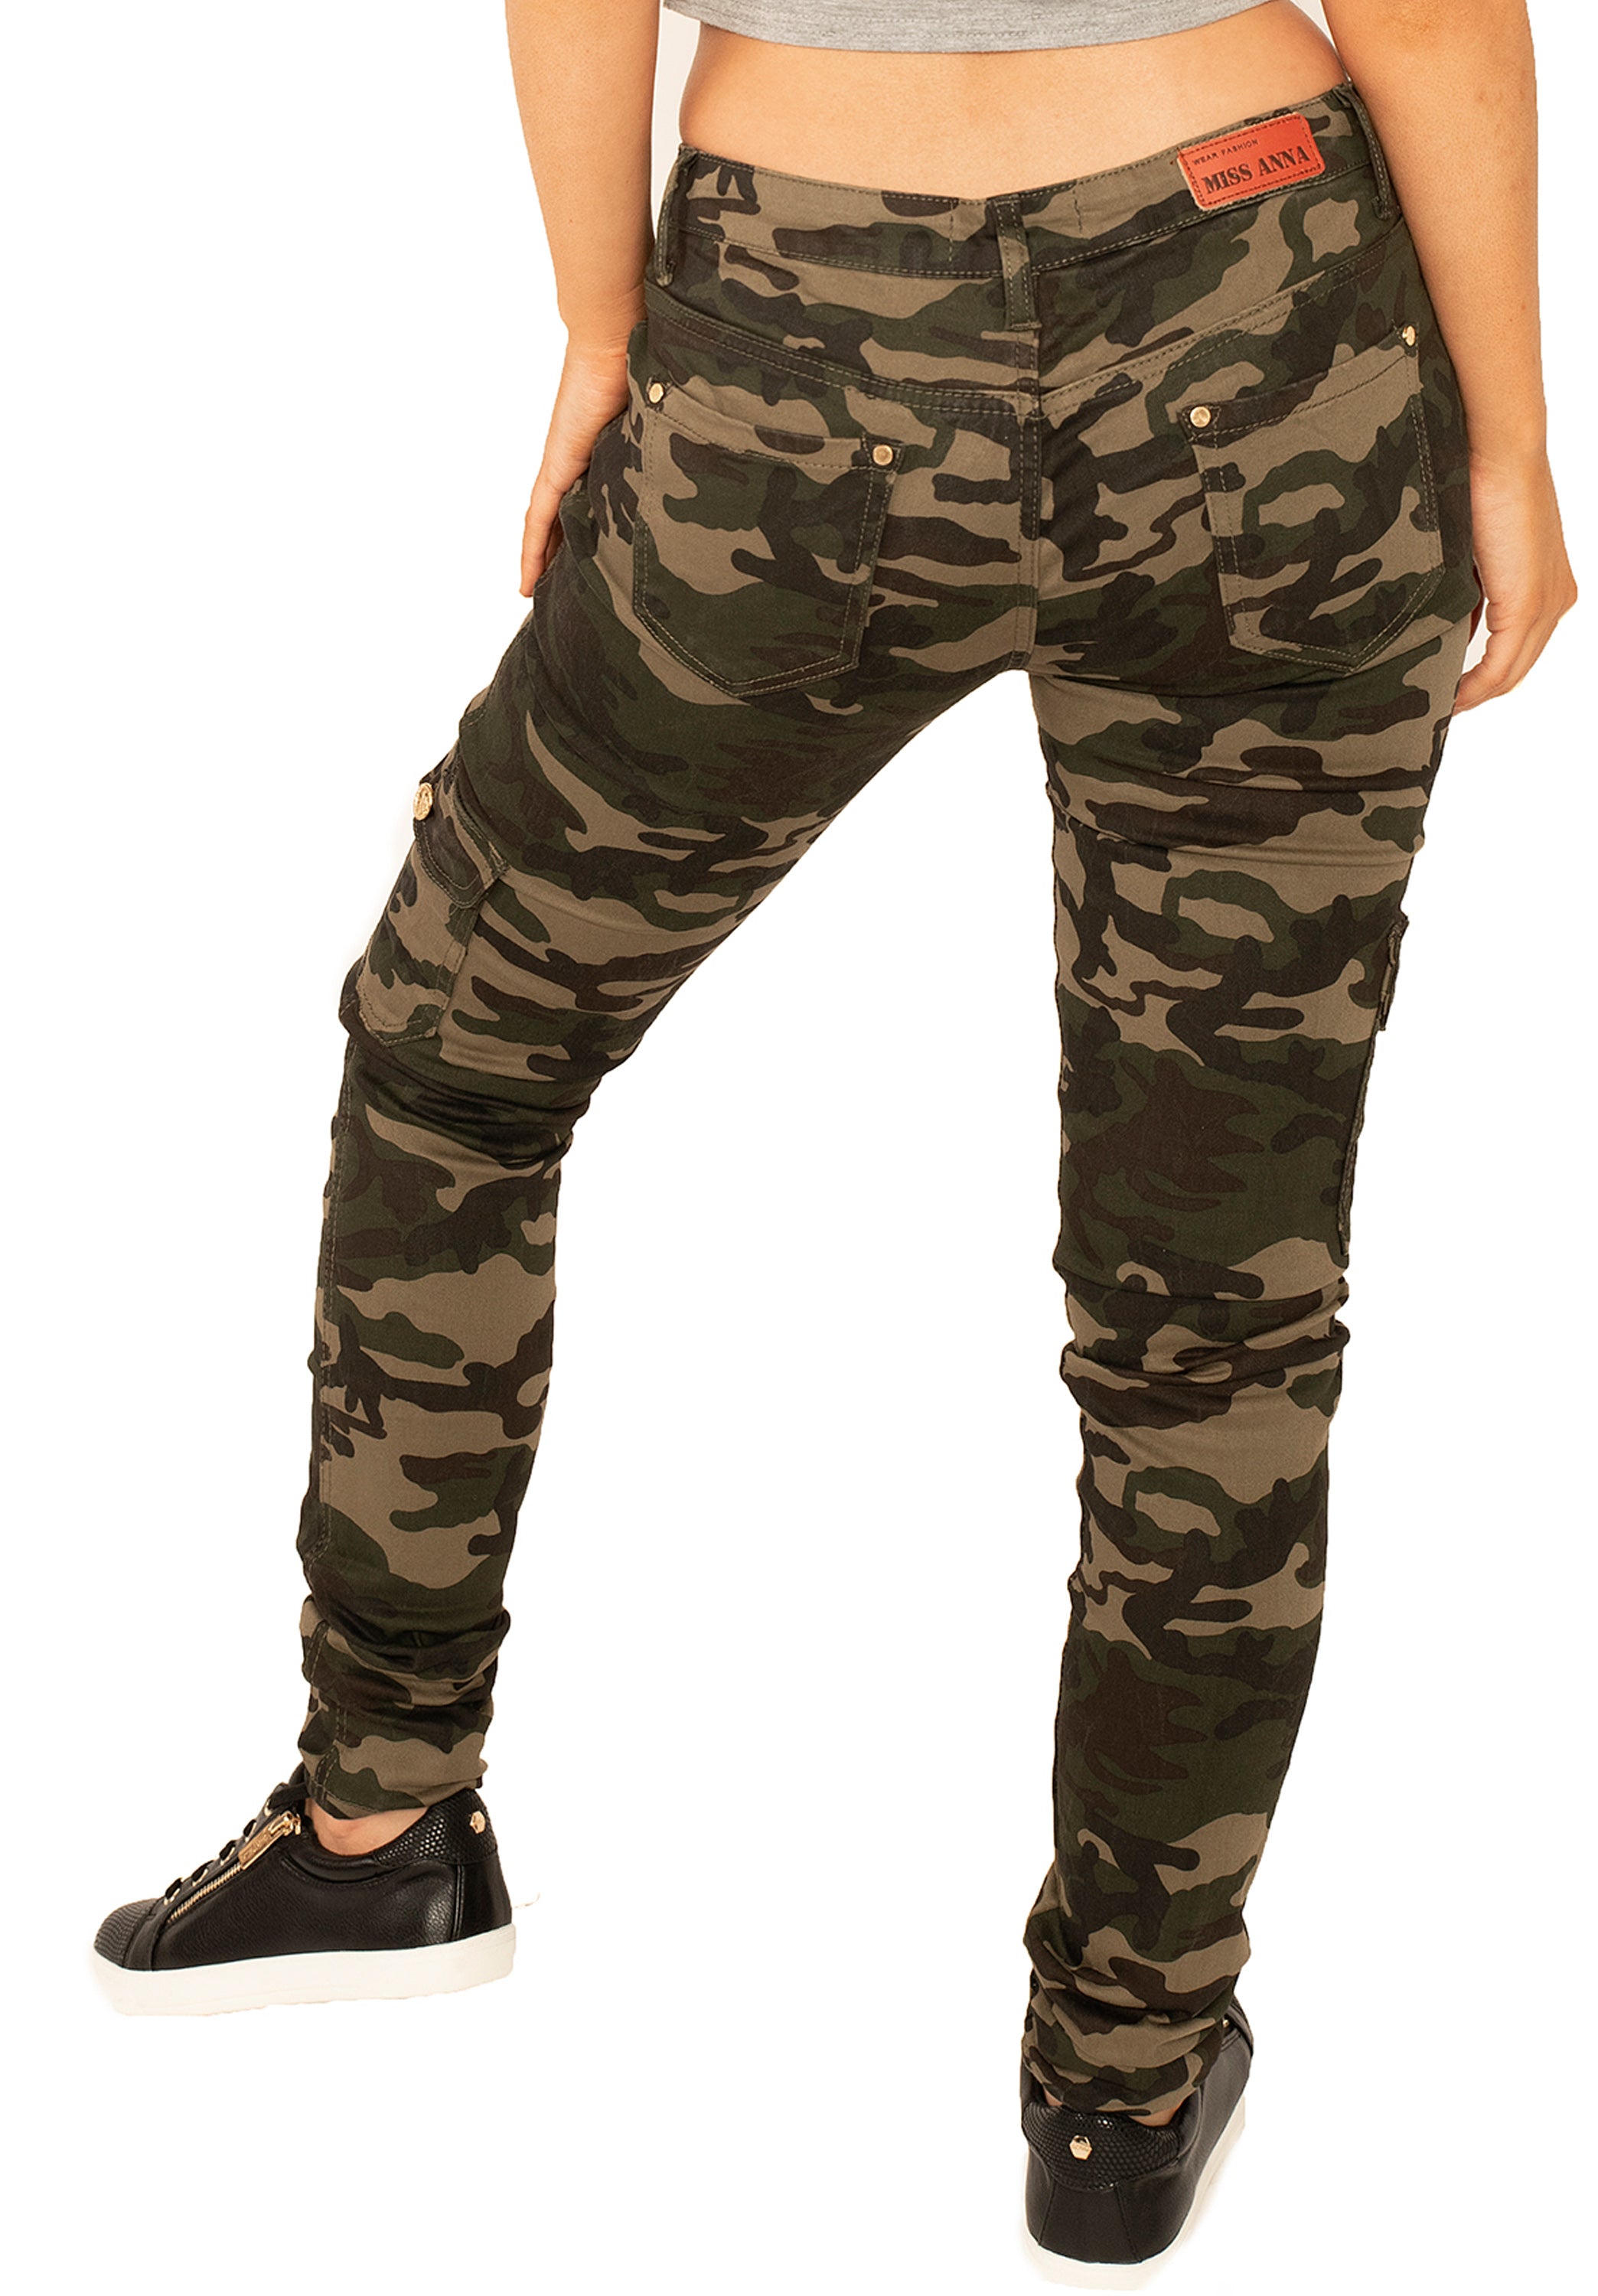 Dark Camouflage Cargo Pants Low Rise - Green & Brown – Glamour Outfitters